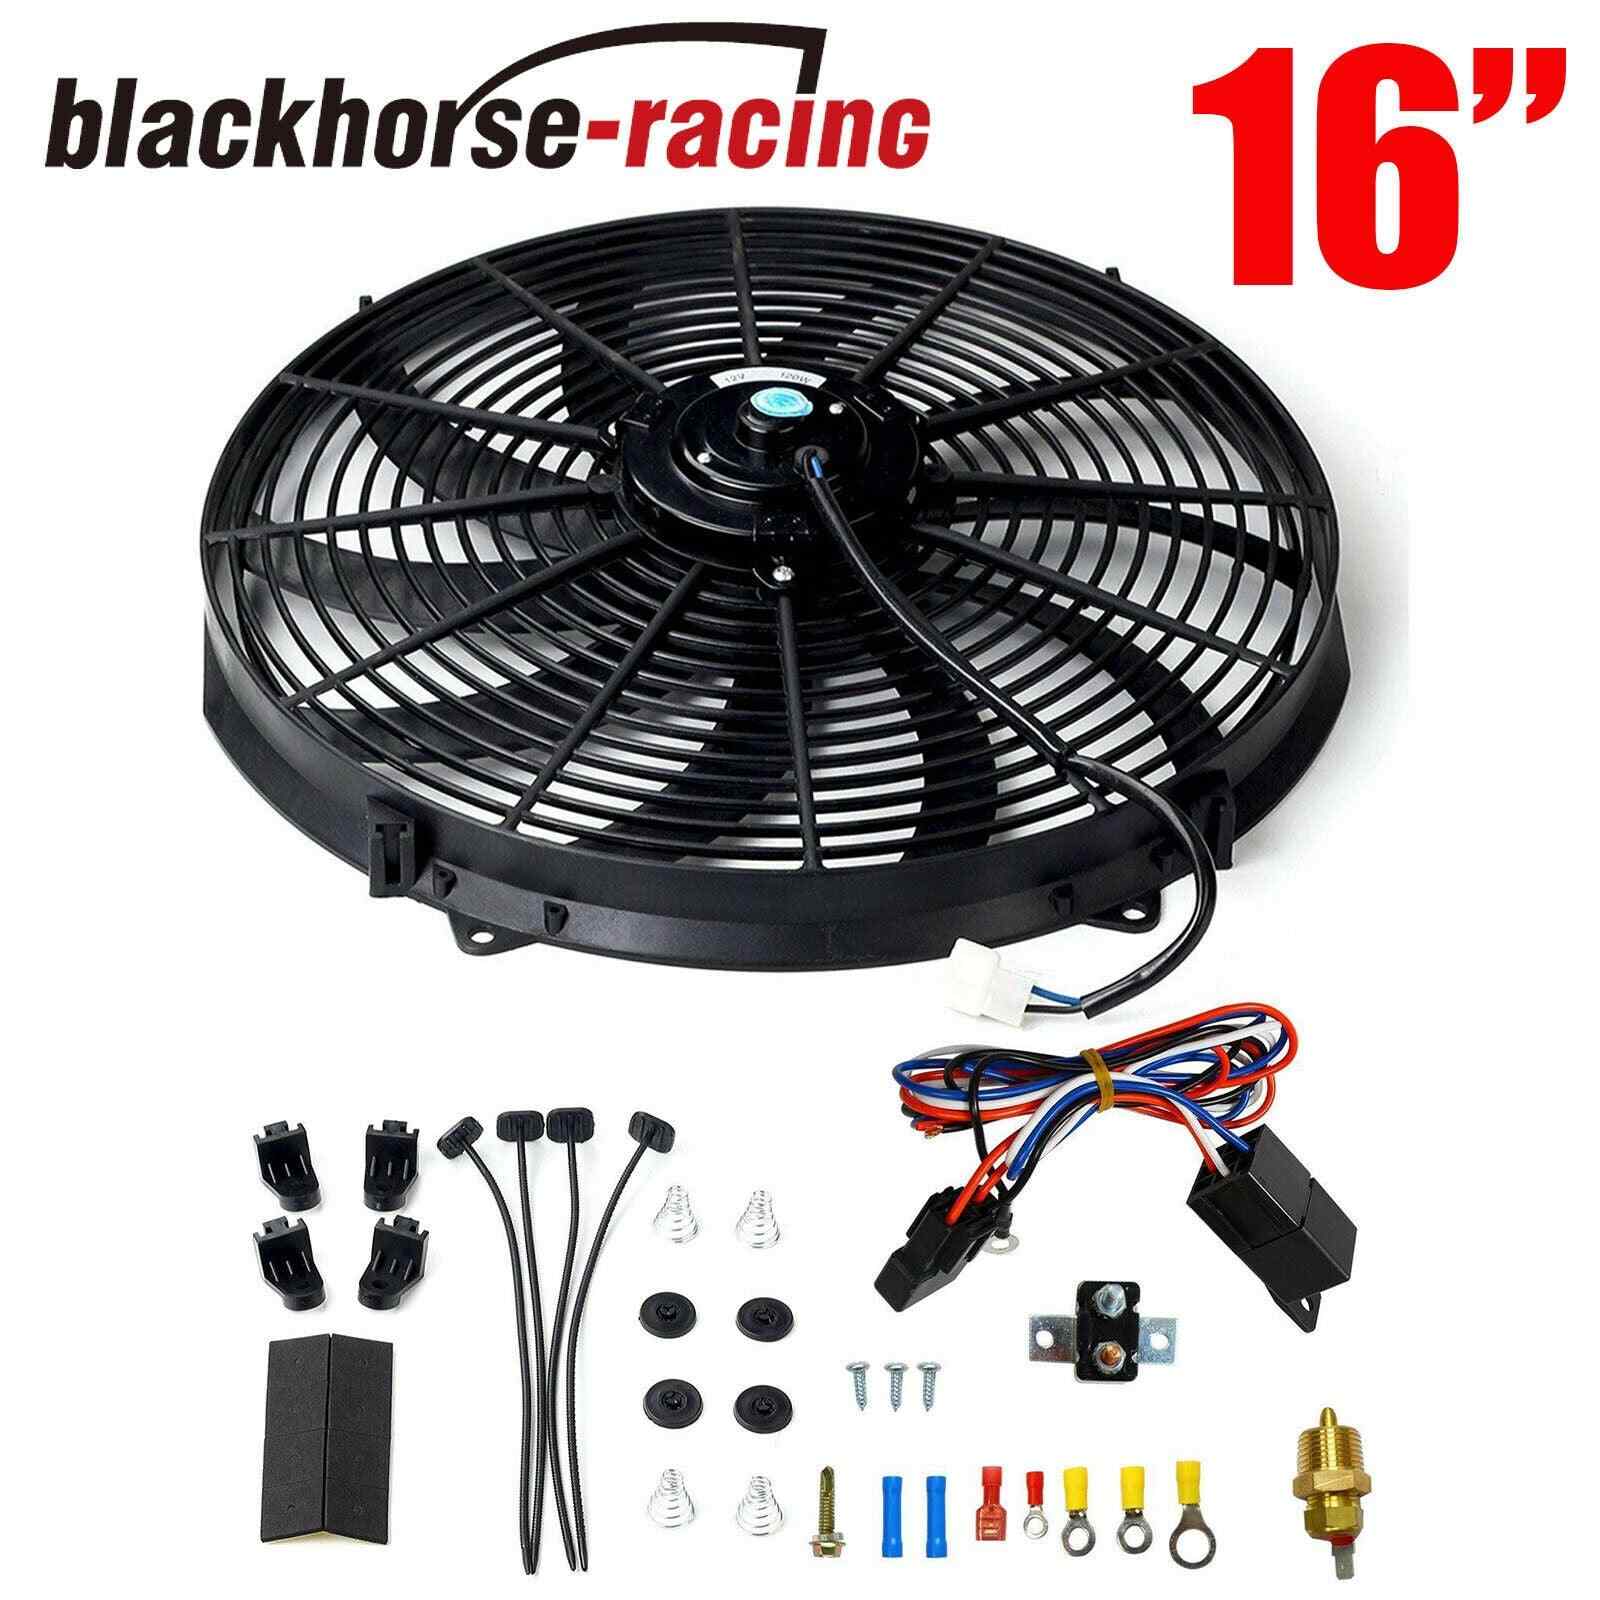 16" Electric Radiator Cooling Fan 12v 3000cfm Thermostat Wiring Switch Relay Kit